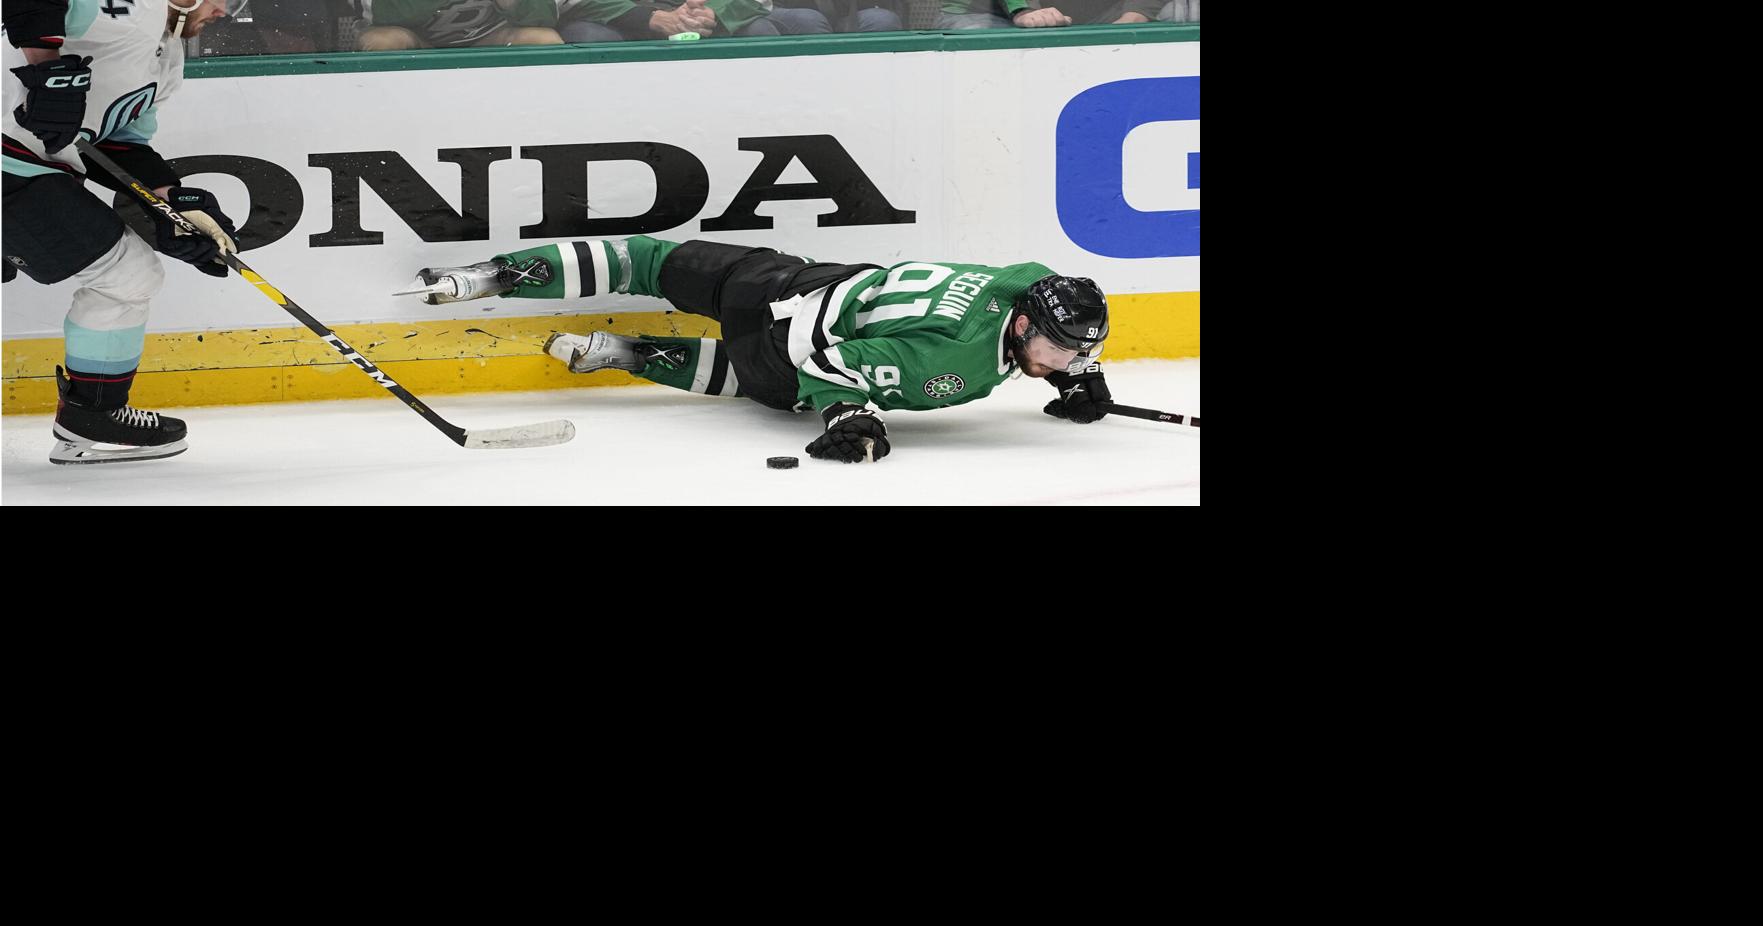 Roope Hintz-led Stars defeat Kraken to take 3-2 series lead - The